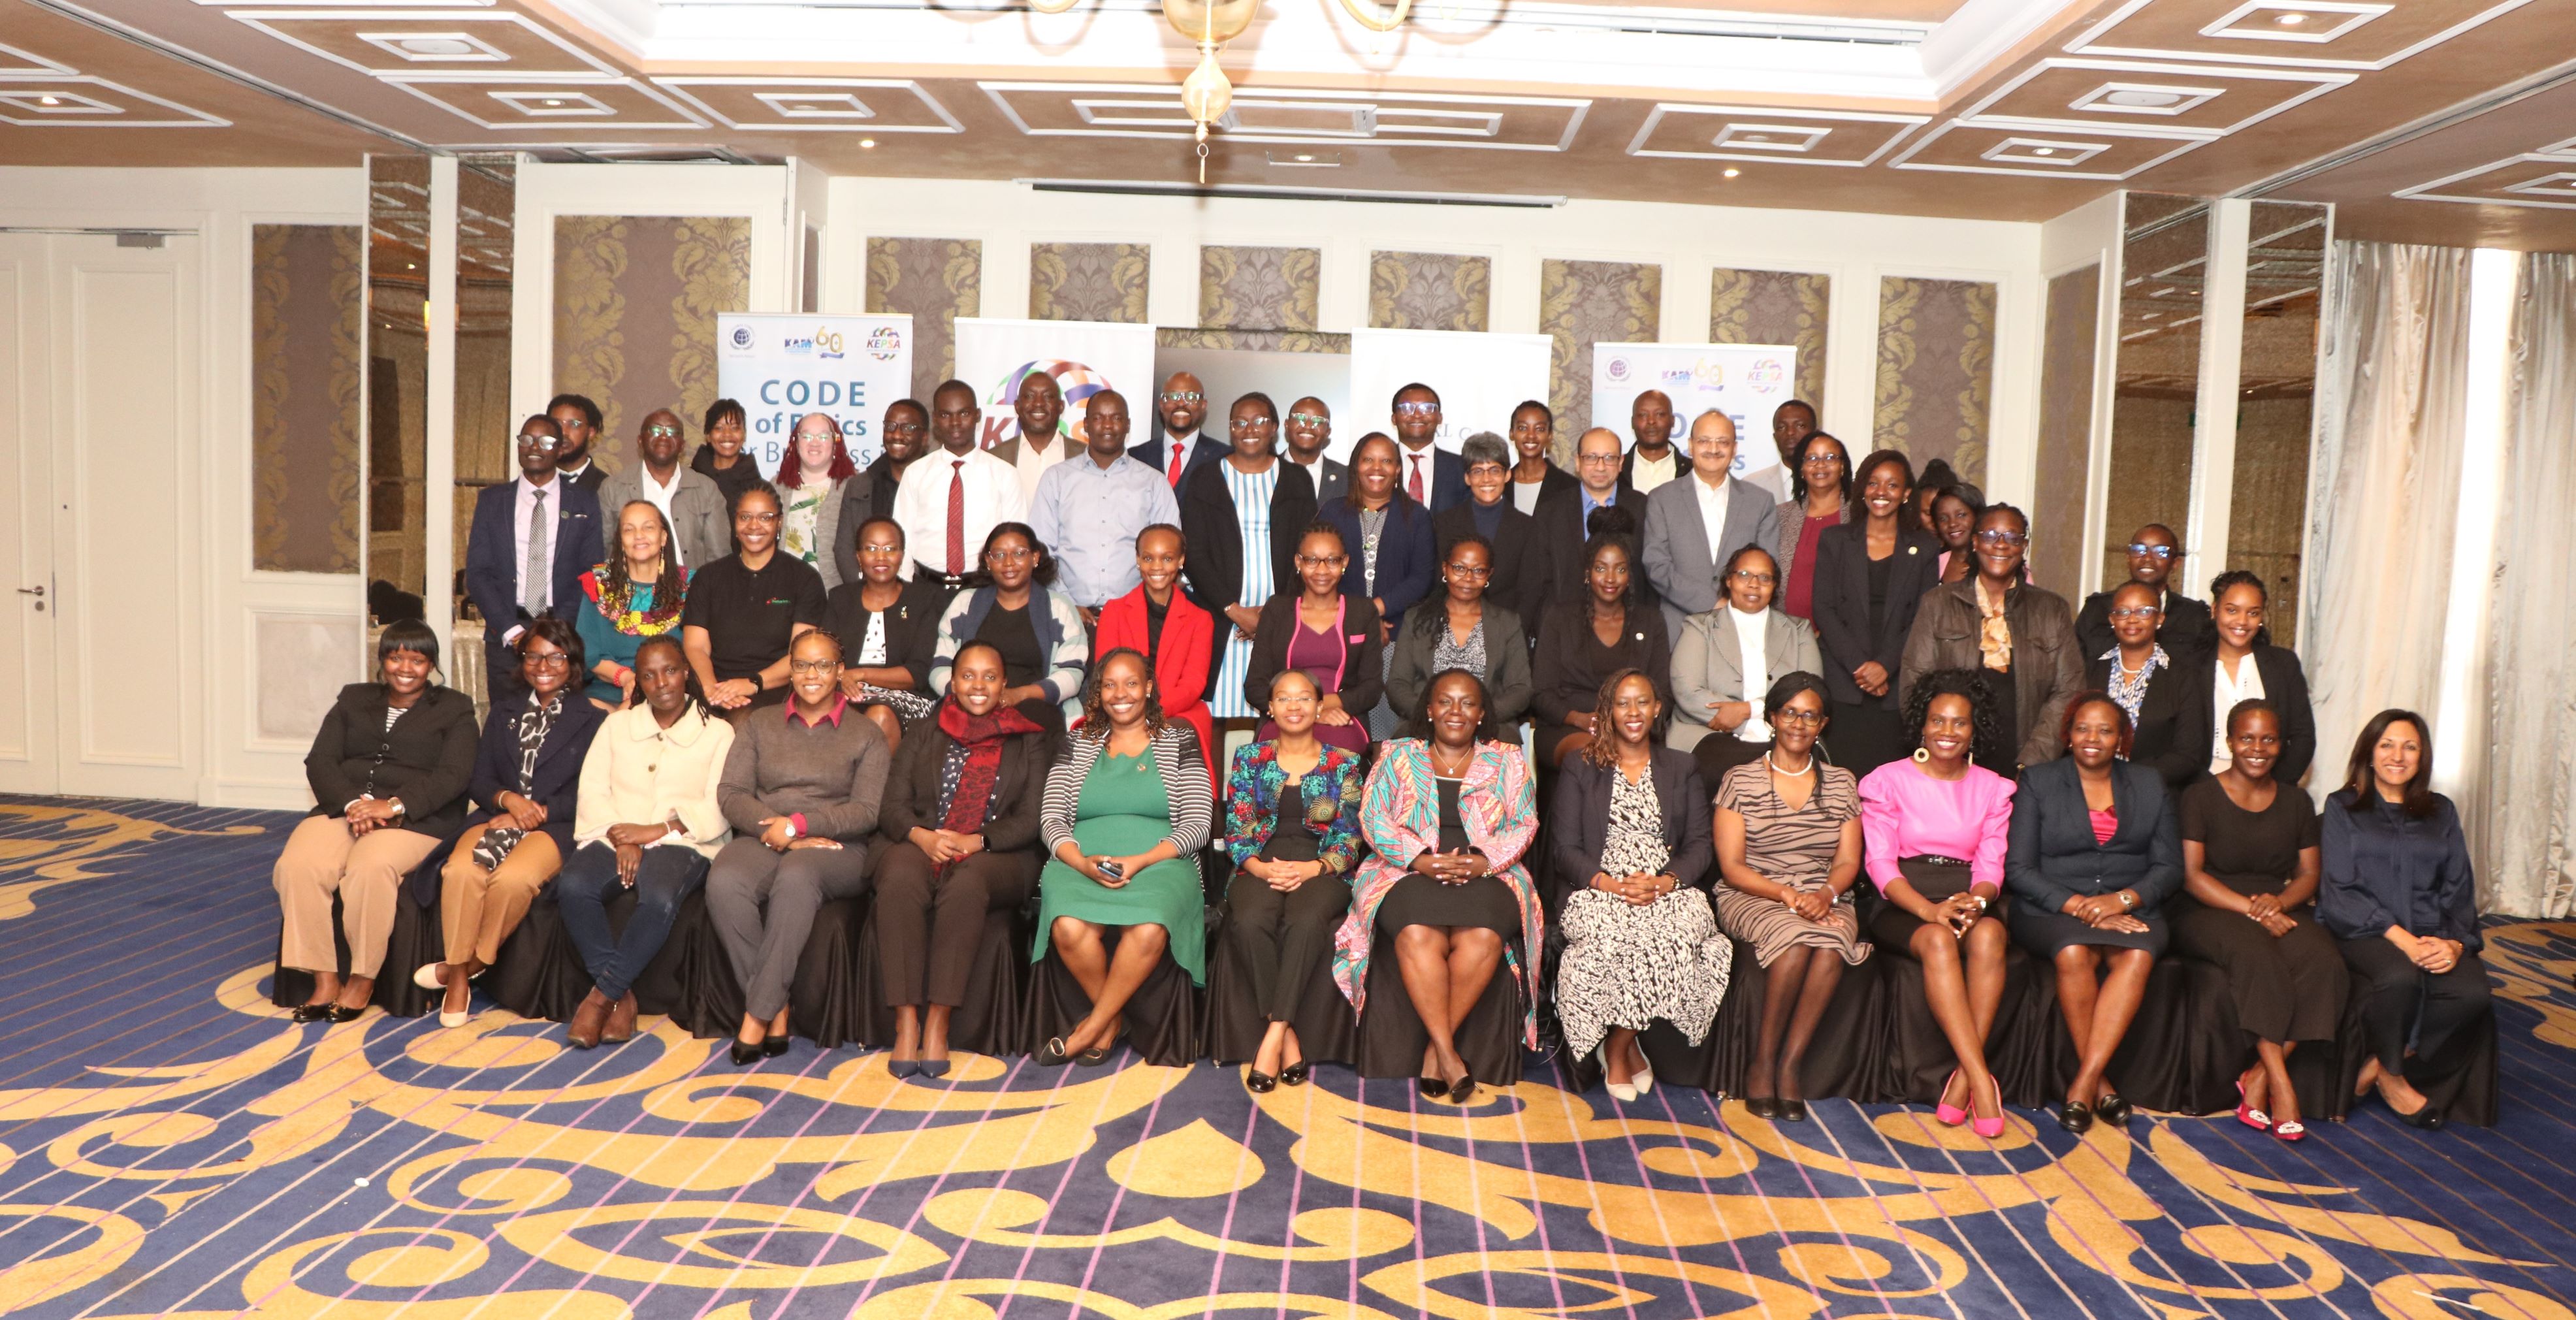 High-Level Meeting on Code of Ethics for Business in Kenya